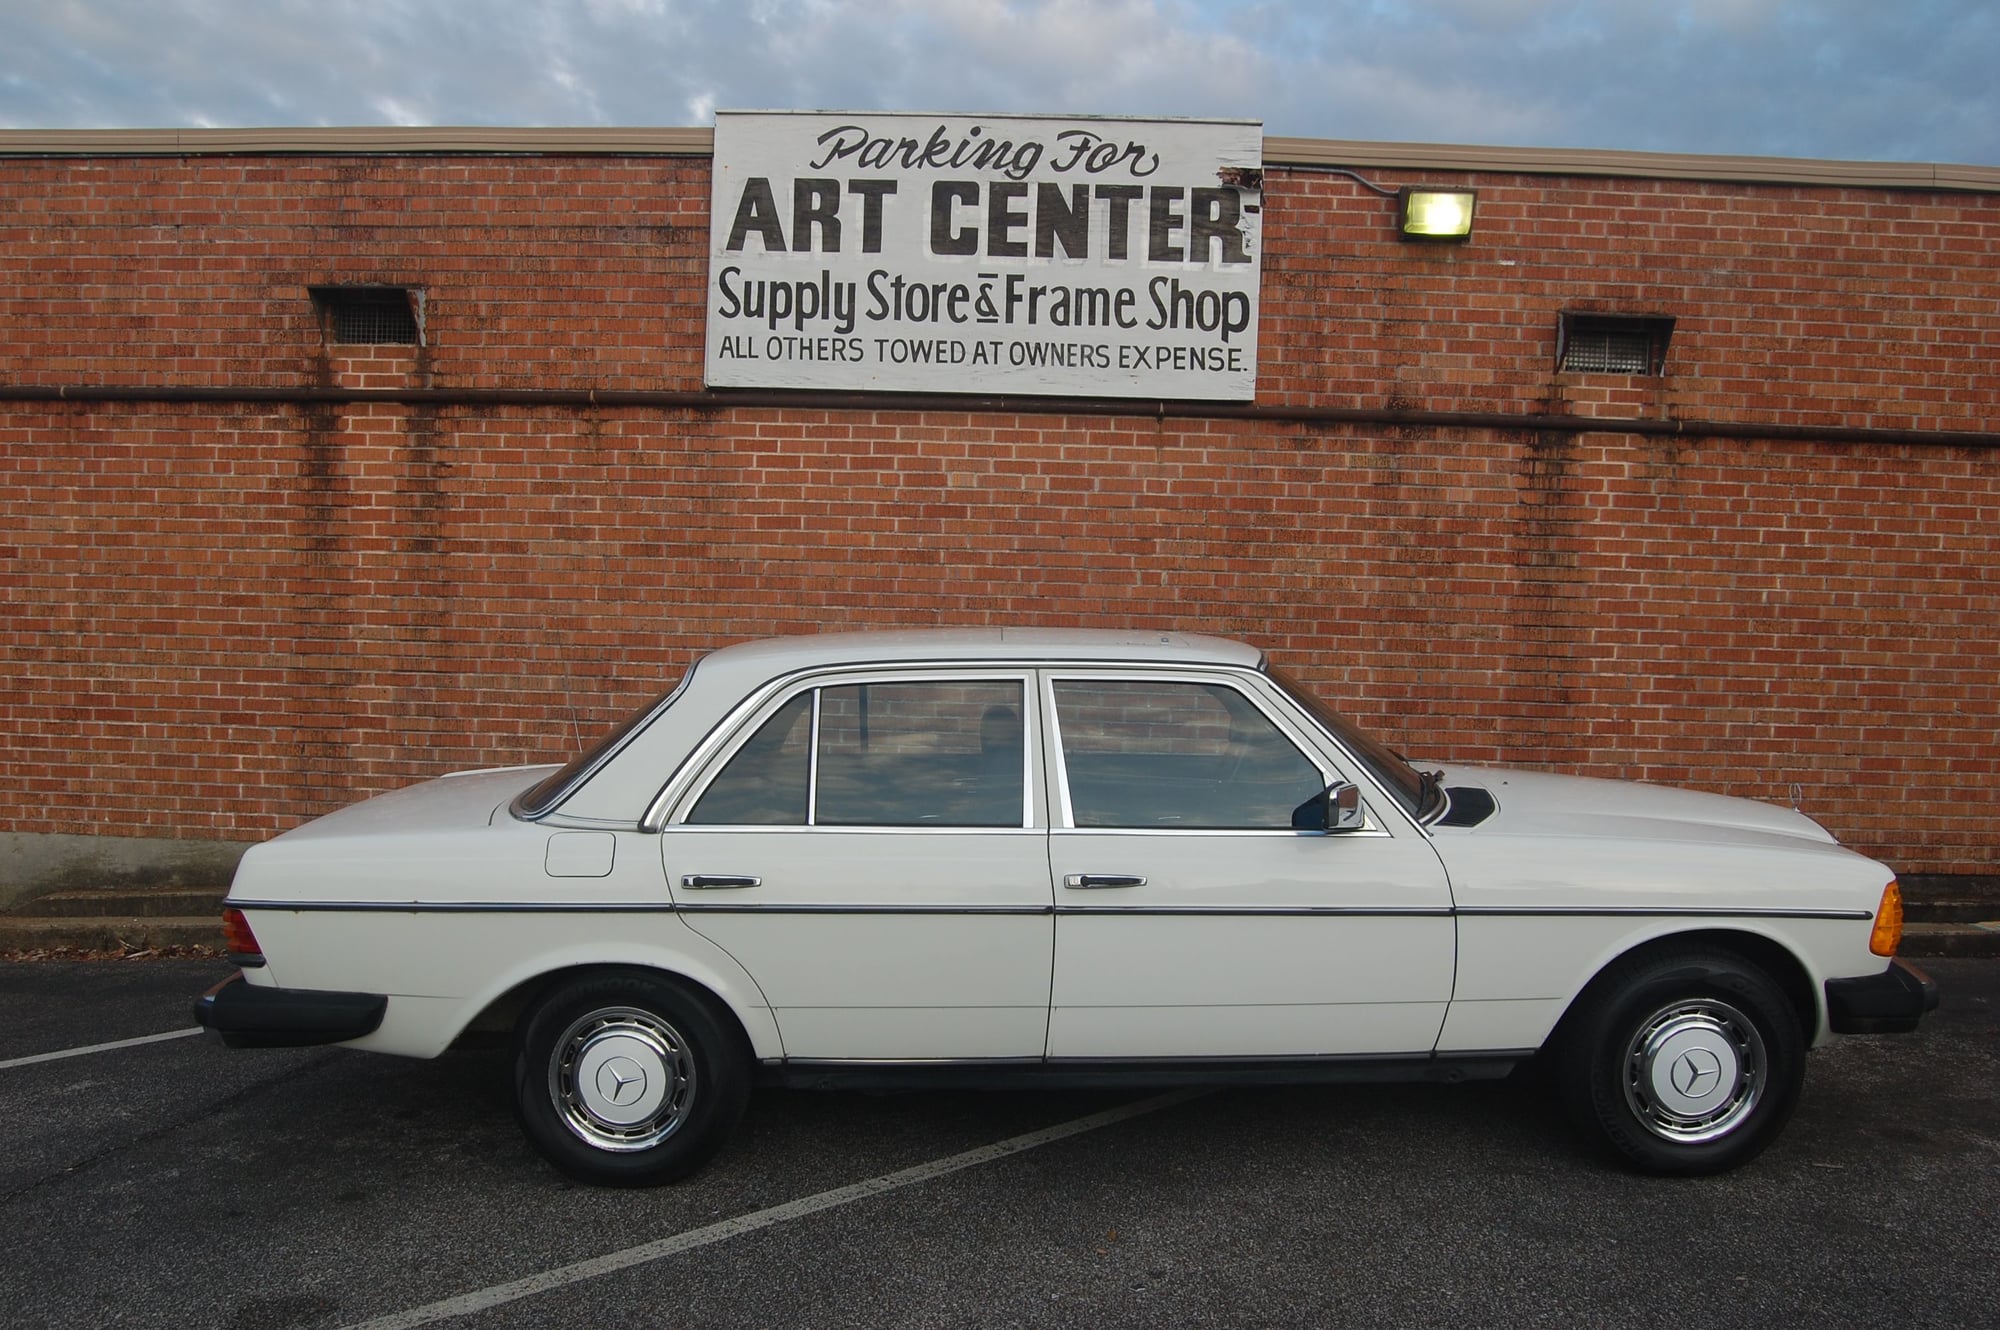 1981 Mercedes-Benz 240D - 1981 Mercedes-Benz 240D Great Driver - Used - VIN WDB23A0BB269197 - 184,000 Miles - 4 cyl - 2WD - Automatic - Sedan - White - Memphis, TN 38117, United States